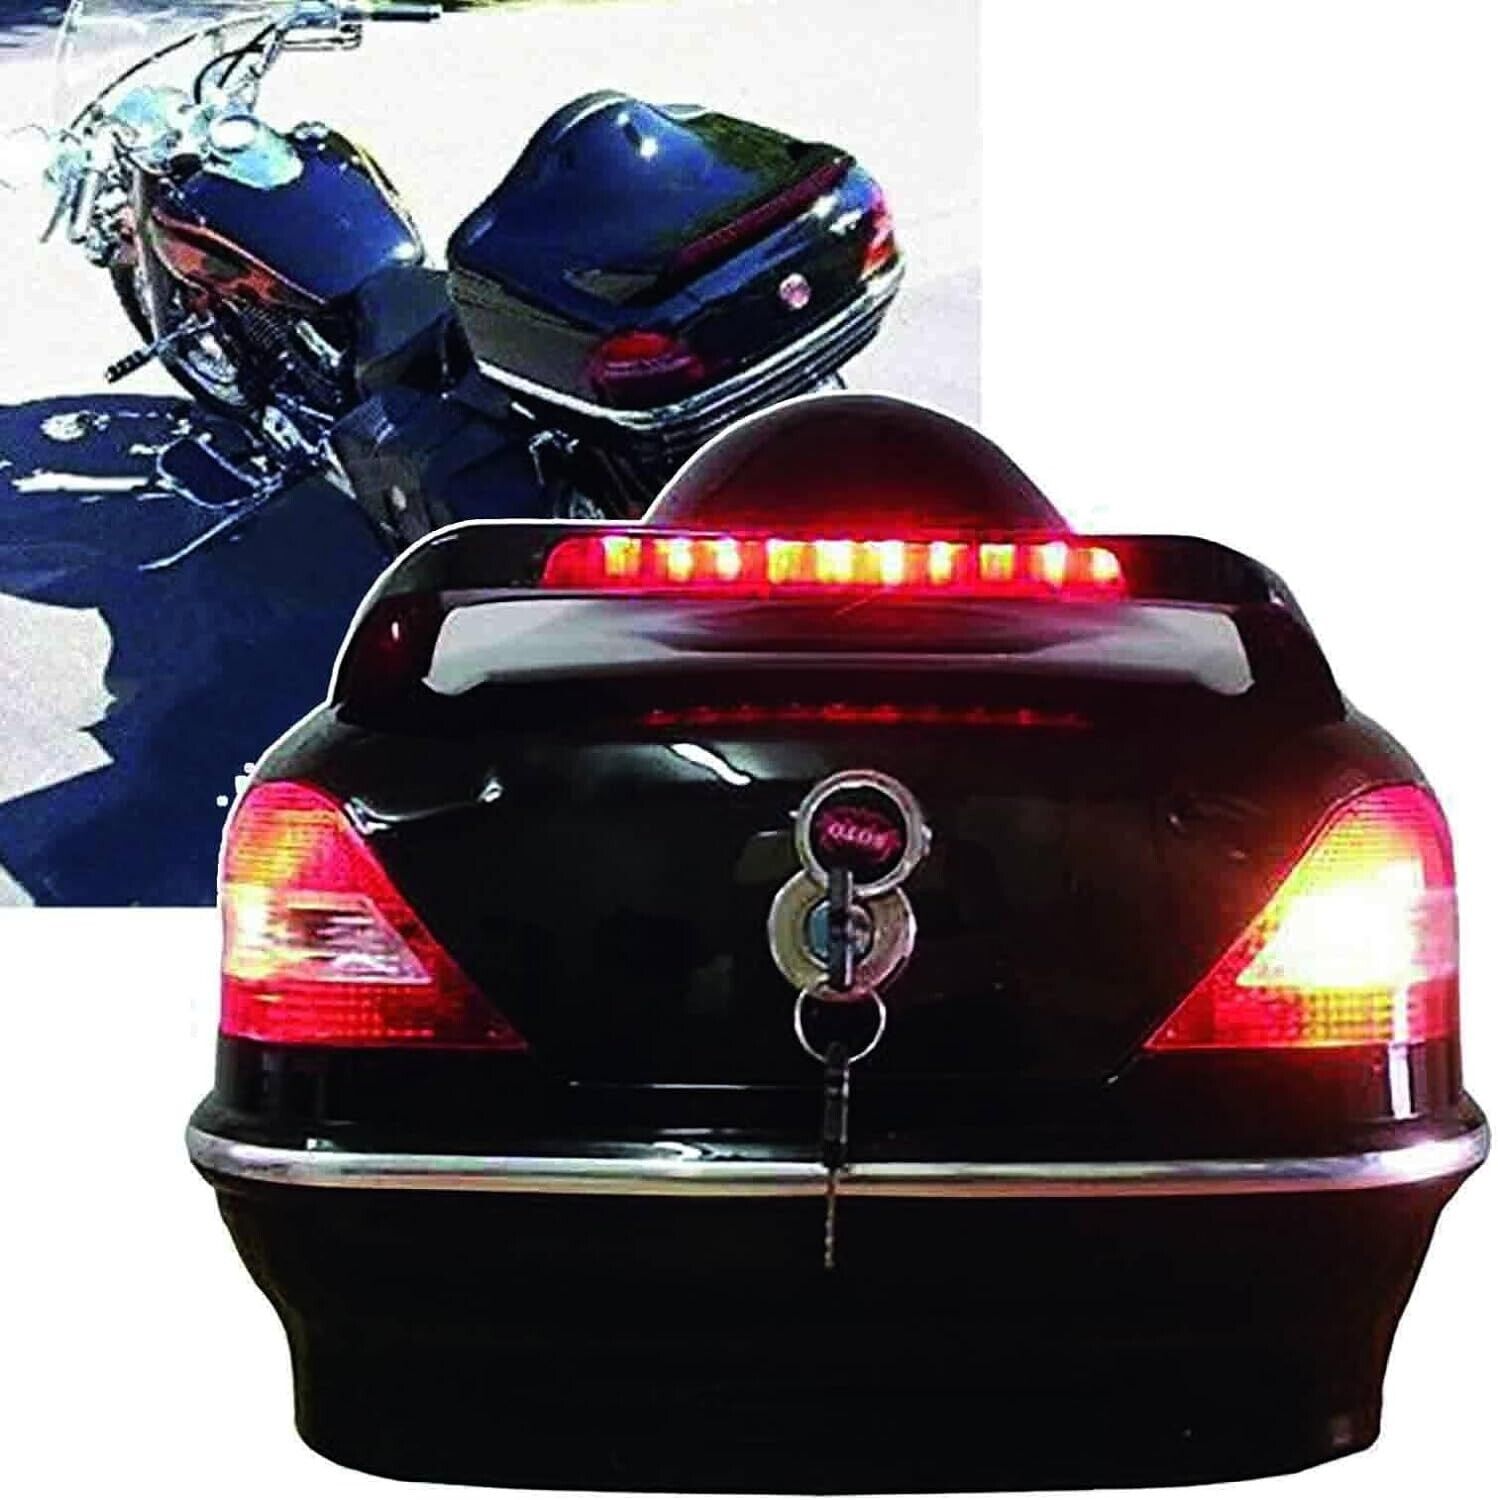 KLUFO 28L Motorcycle Trunk Tail Box with Light and Safety Lock (BLACK)